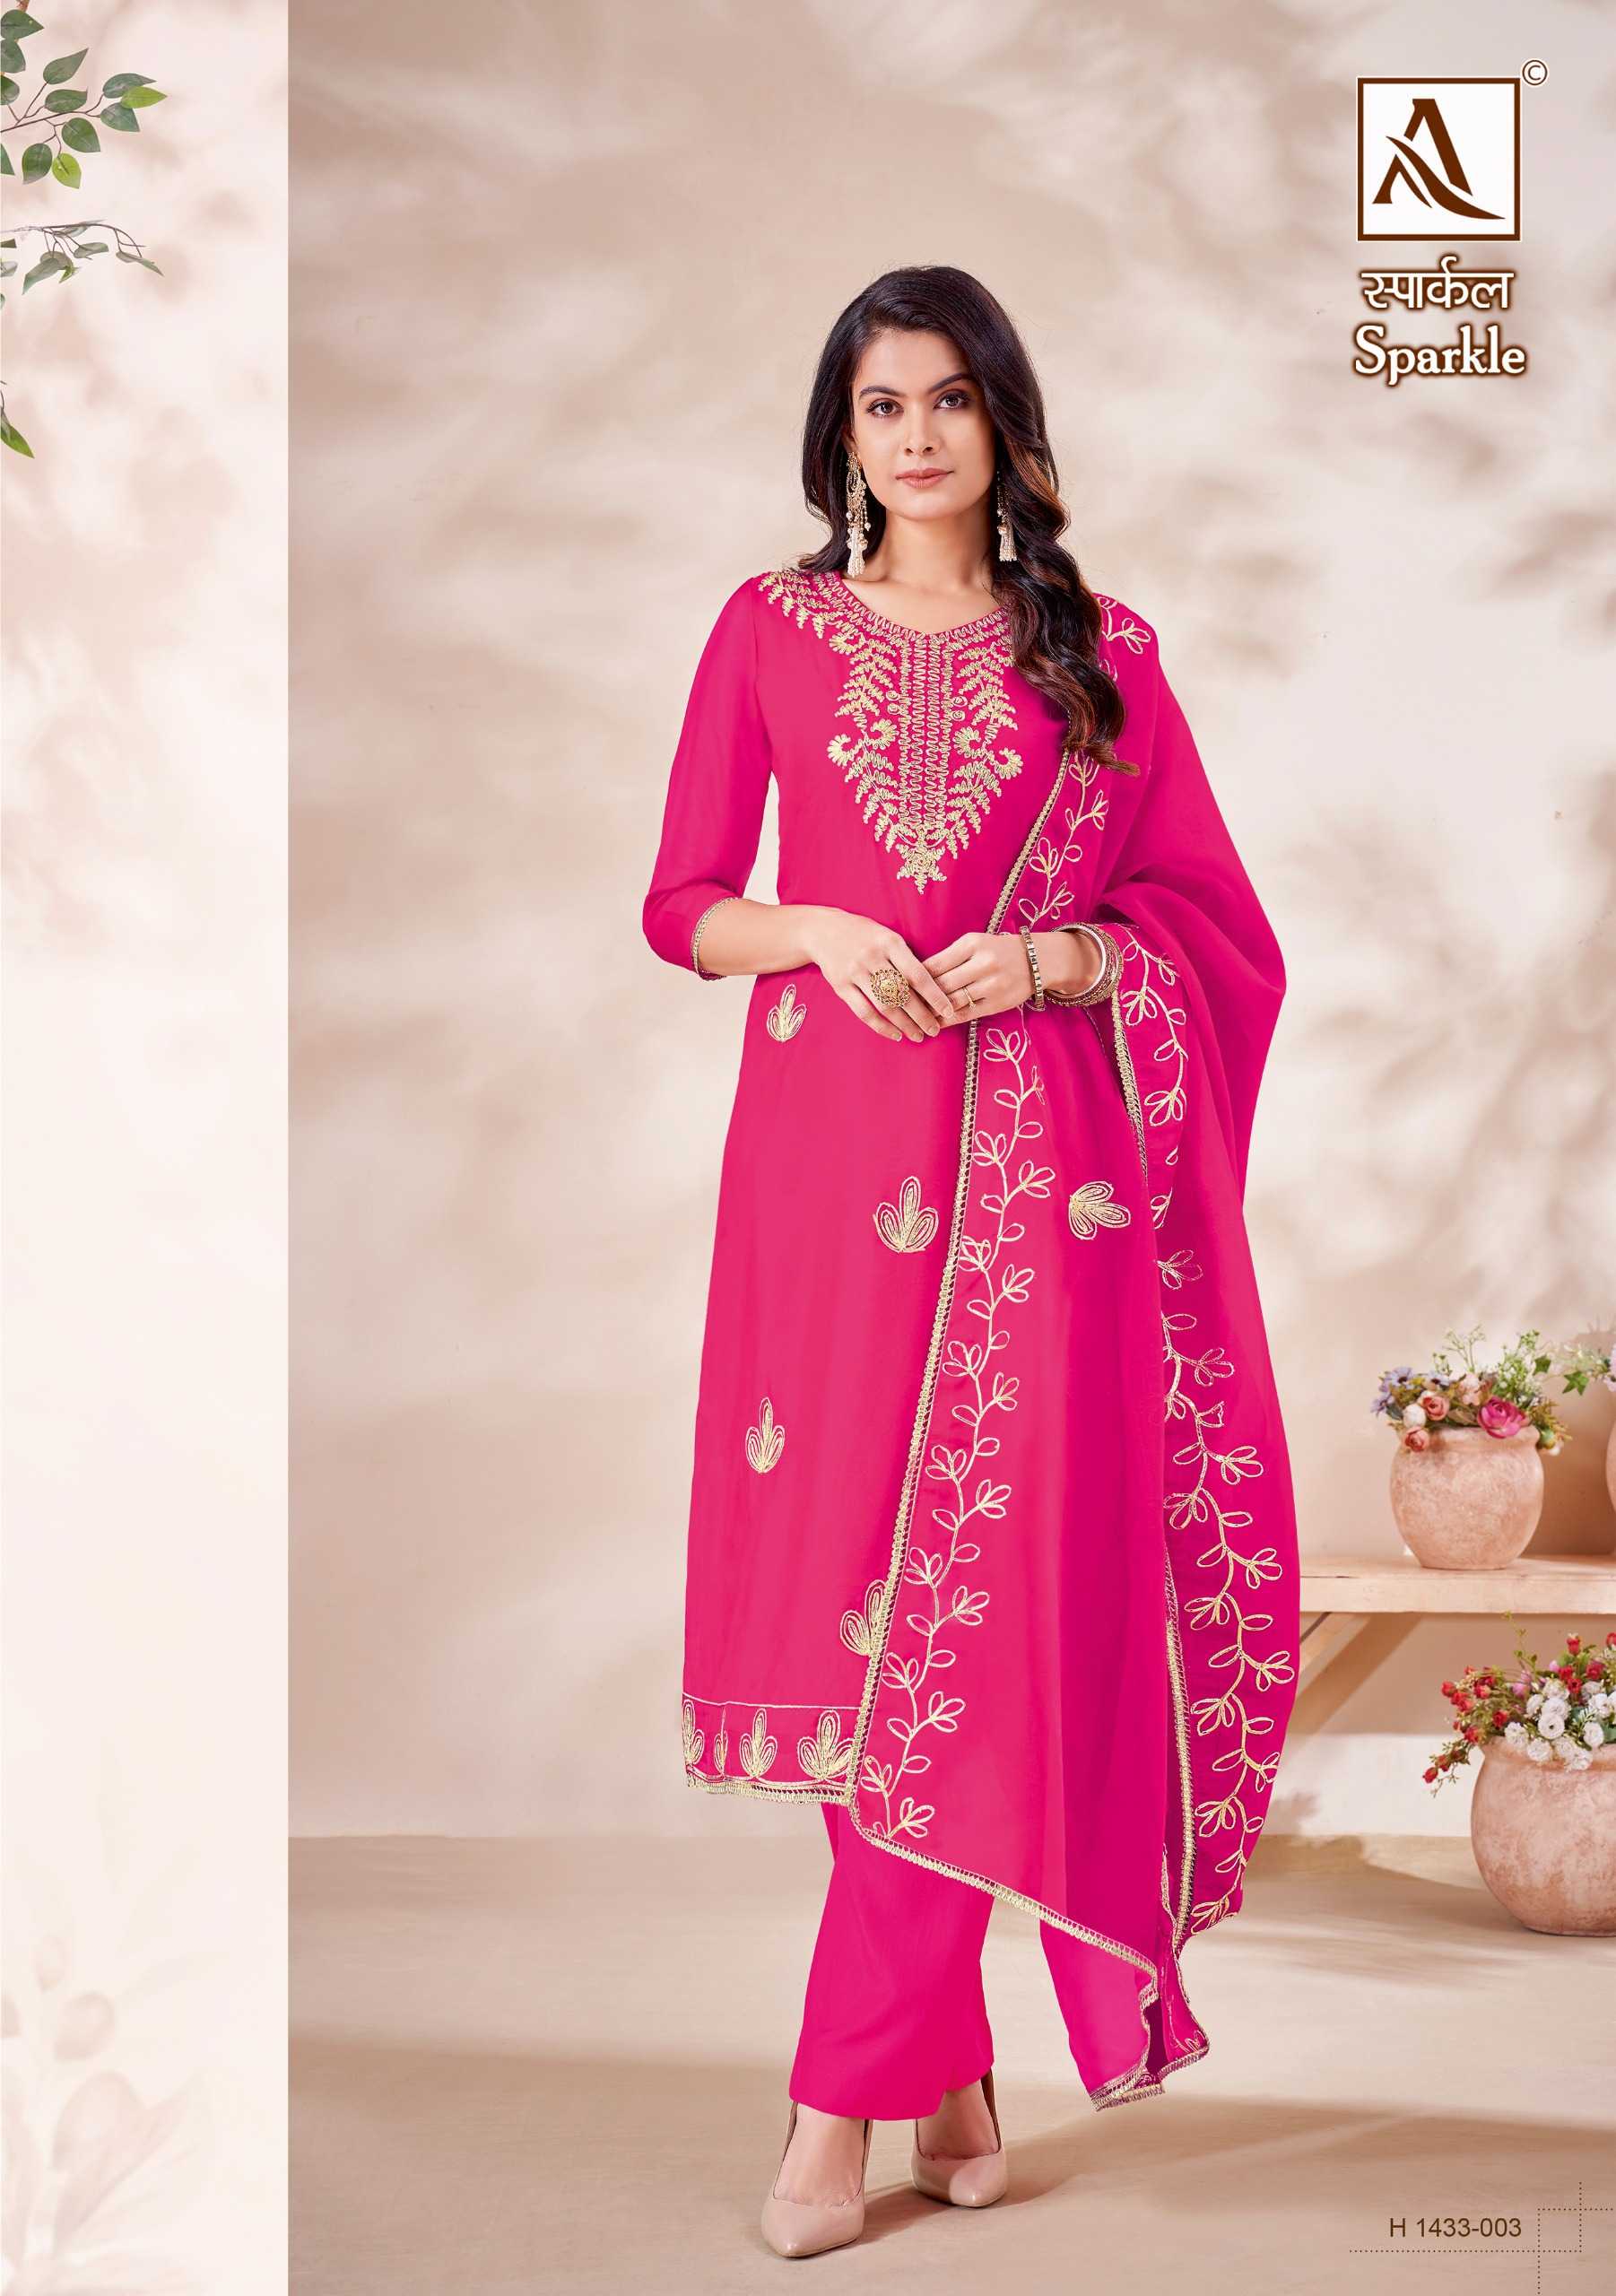 ALOK SUIT SPARKLE FANCY ORGANZA GOTA WORK EMBROIDERY DRESS MATERIAL